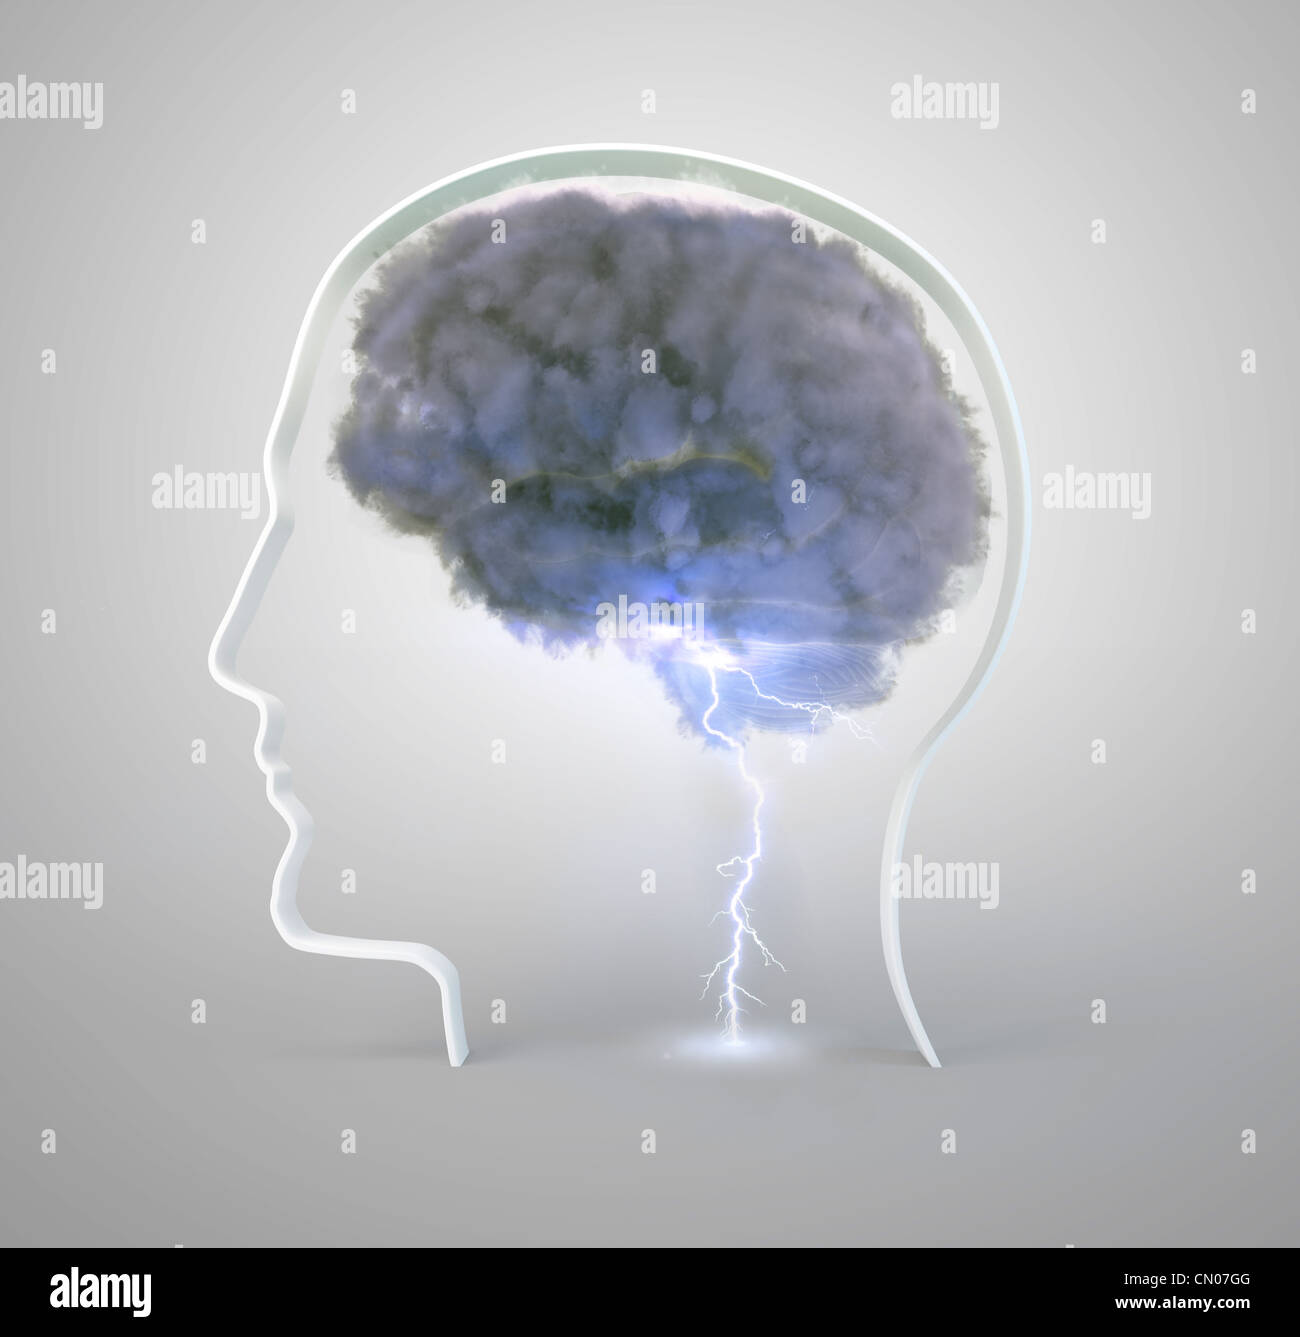 Brainstorming and creativity concept illustration Stock Photo